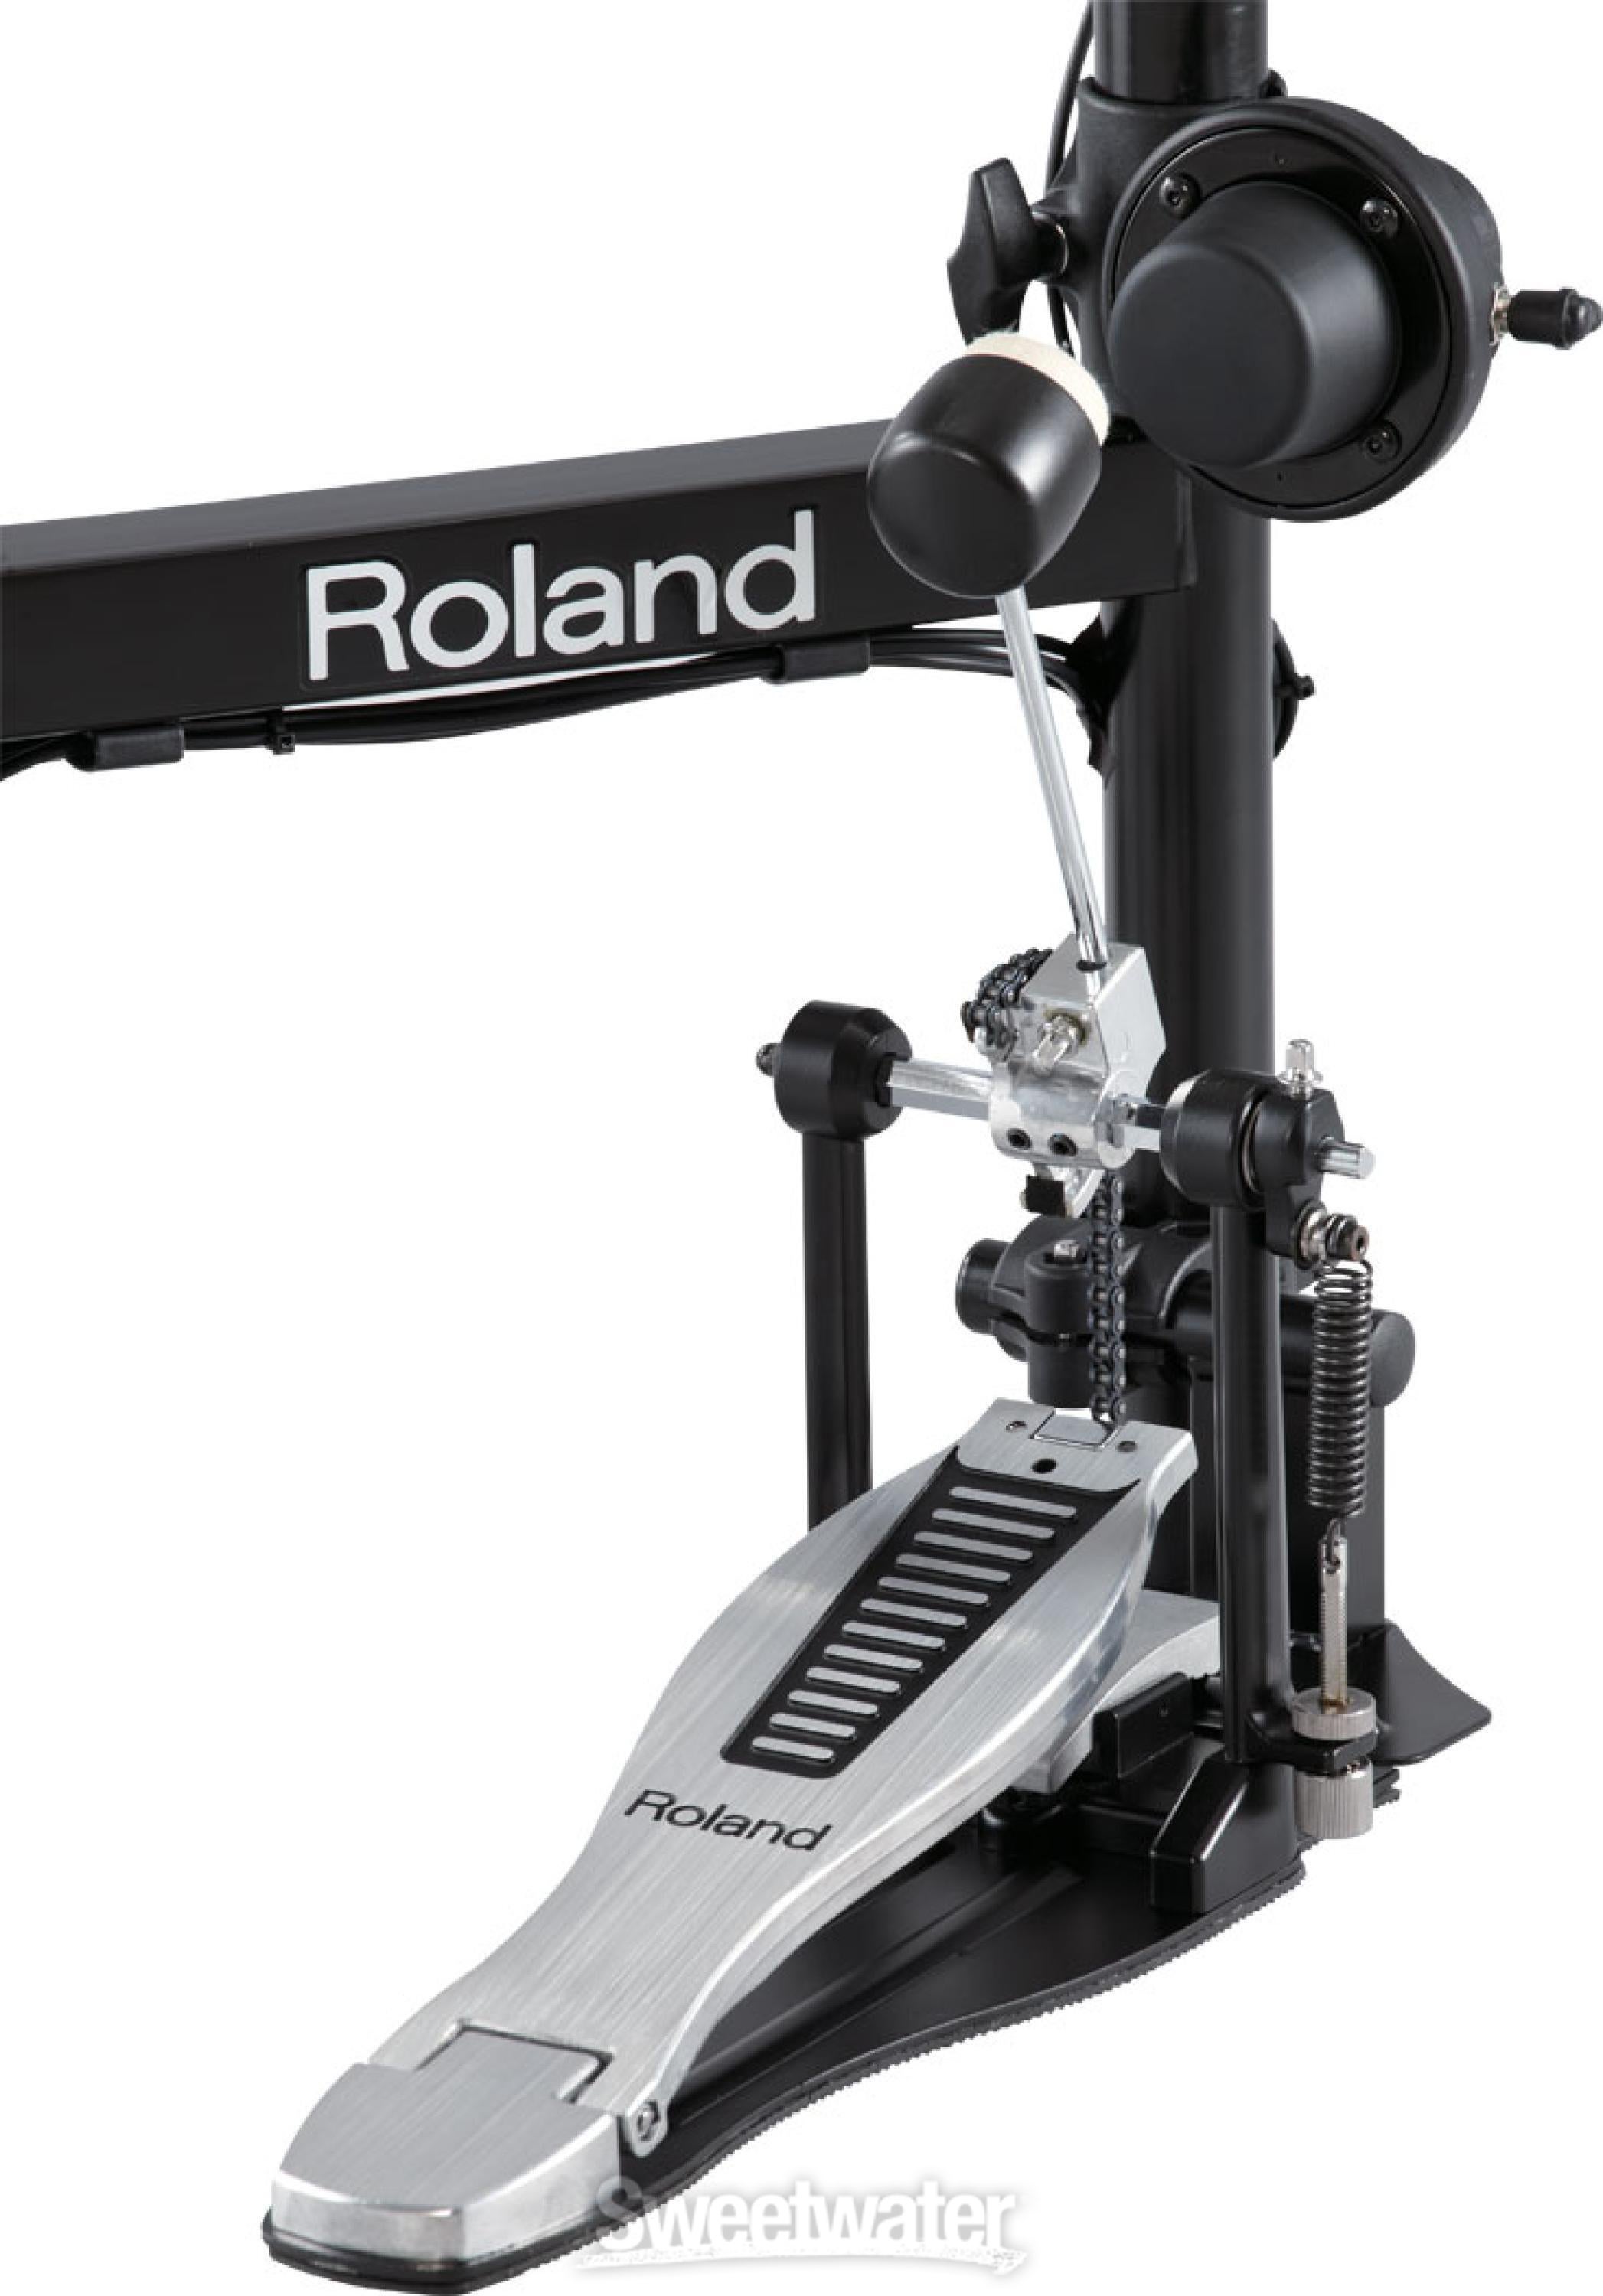 Roland V-Drums Portable TD-4KP Electronic Drum Set | Sweetwater